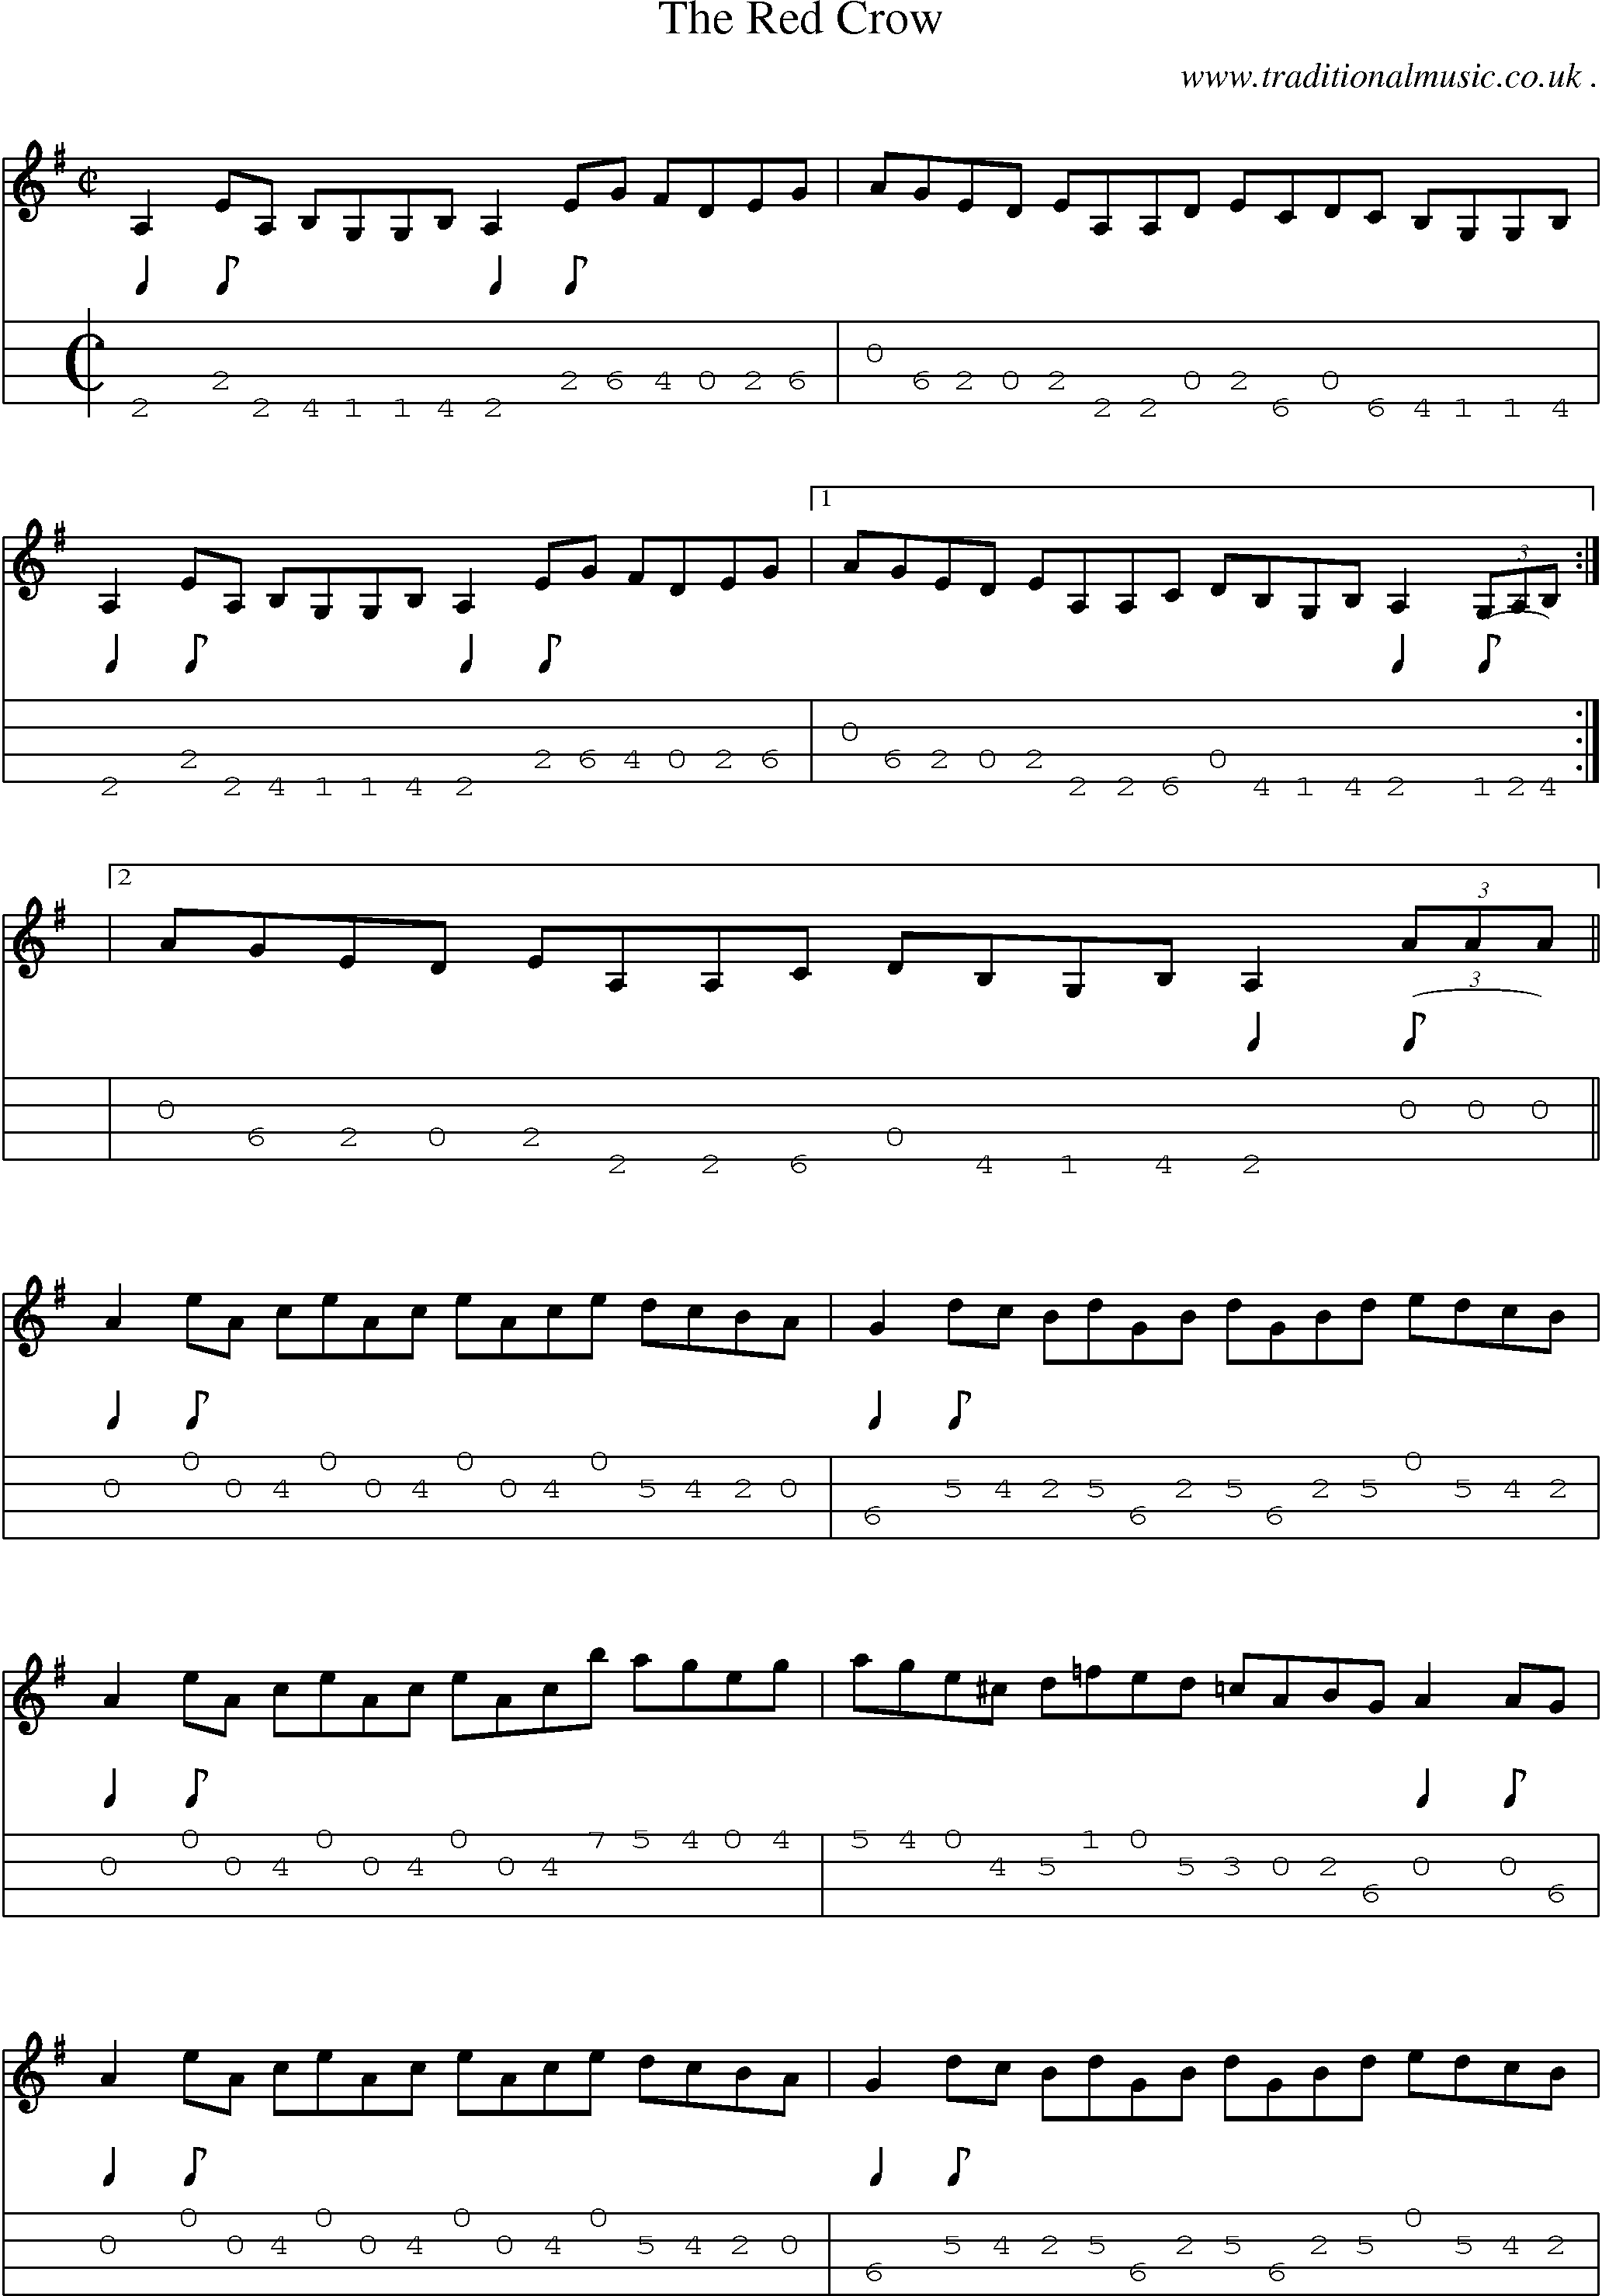 Sheet-Music and Mandolin Tabs for The Red Crow